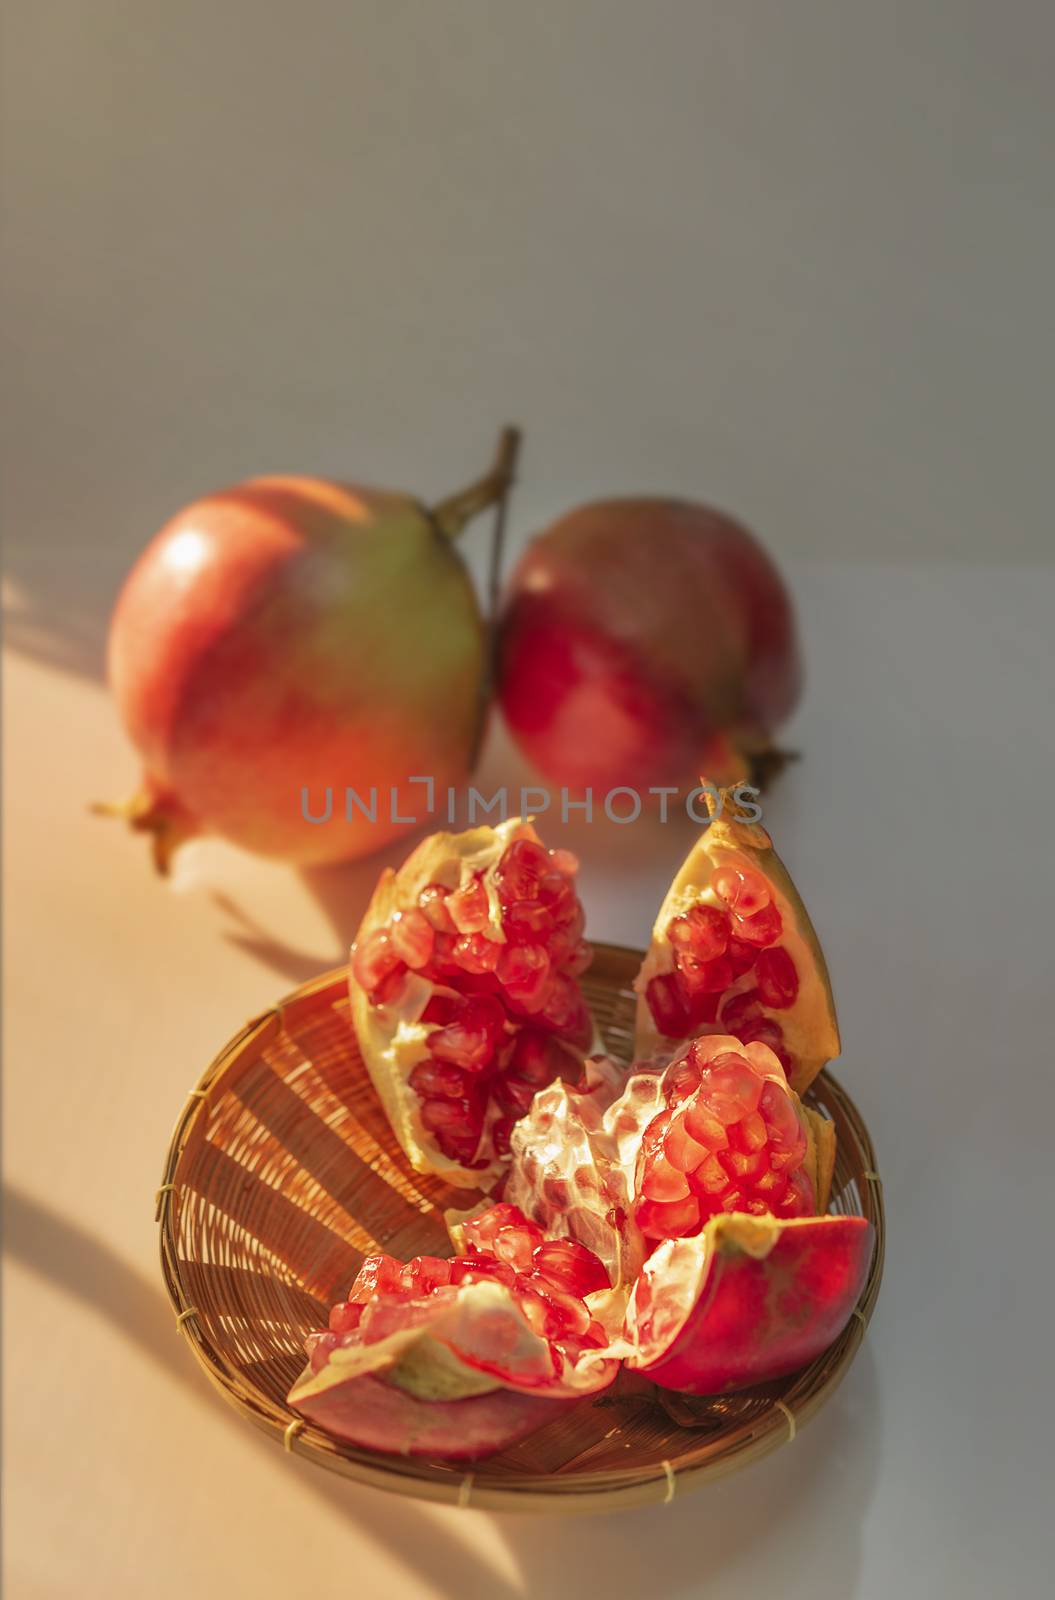 Pomegranate Fruit and wooden basket with sunlight